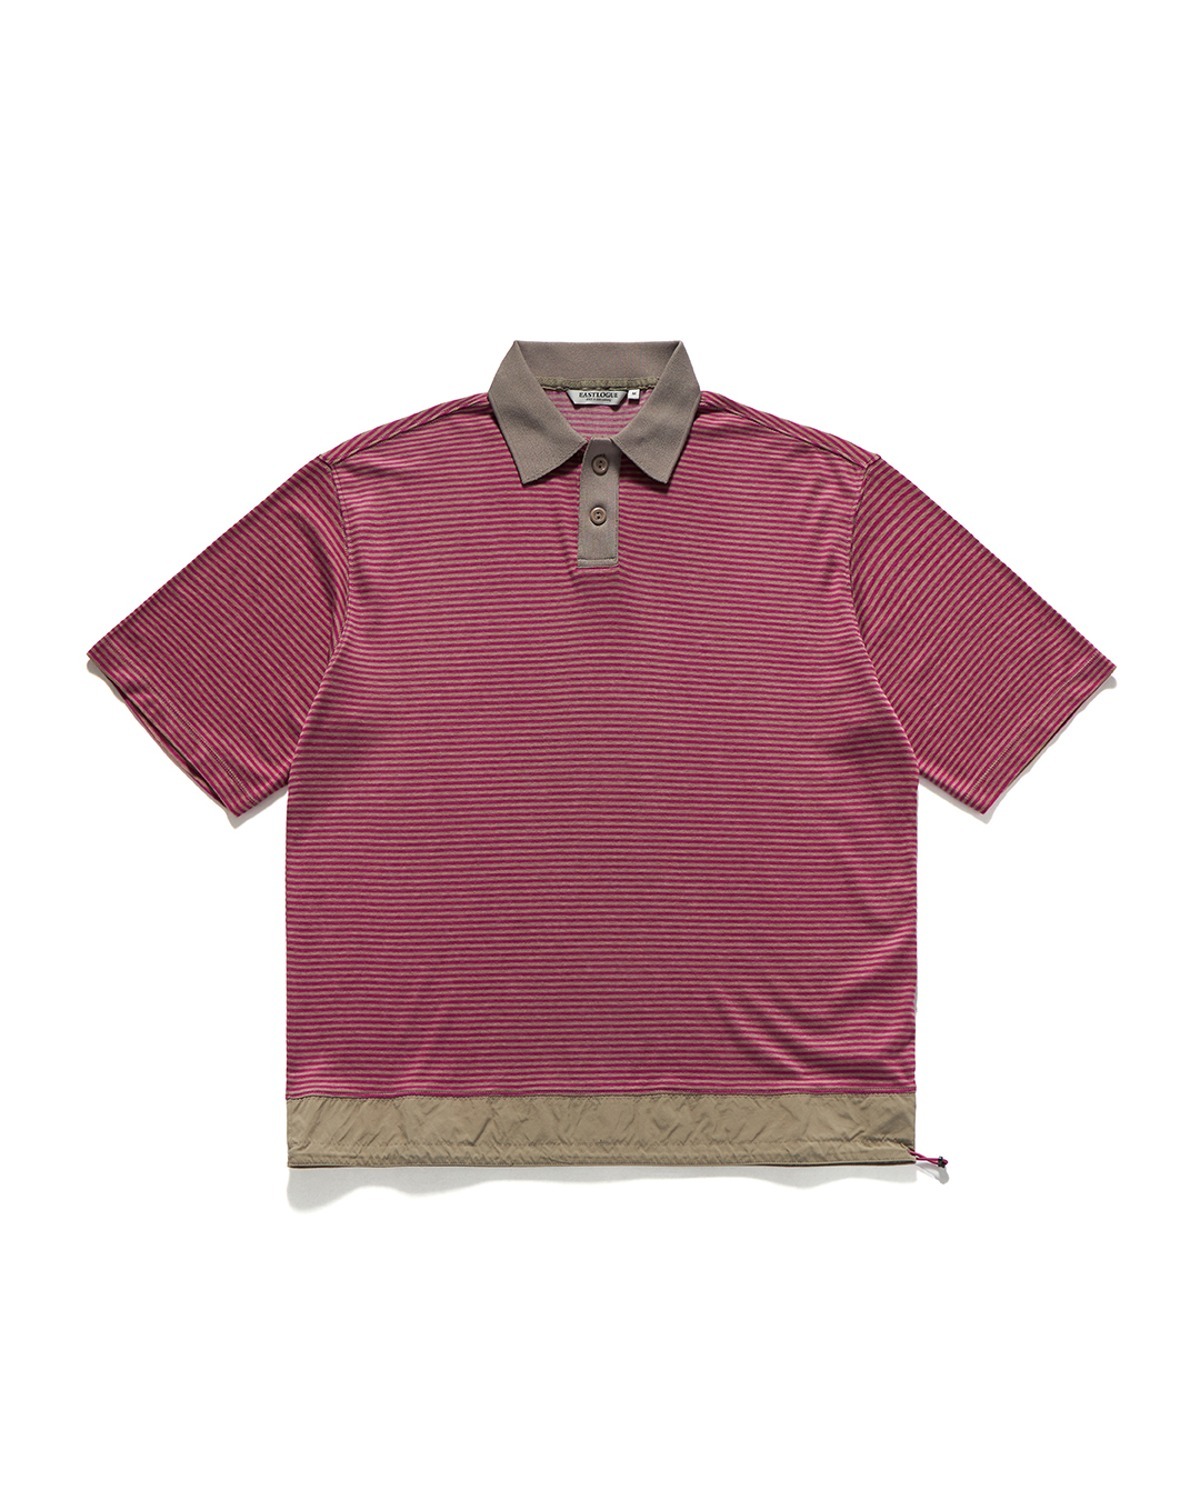 FUNCTIONAL RELAXED POLO SHIRT / BEIGE STRIPE